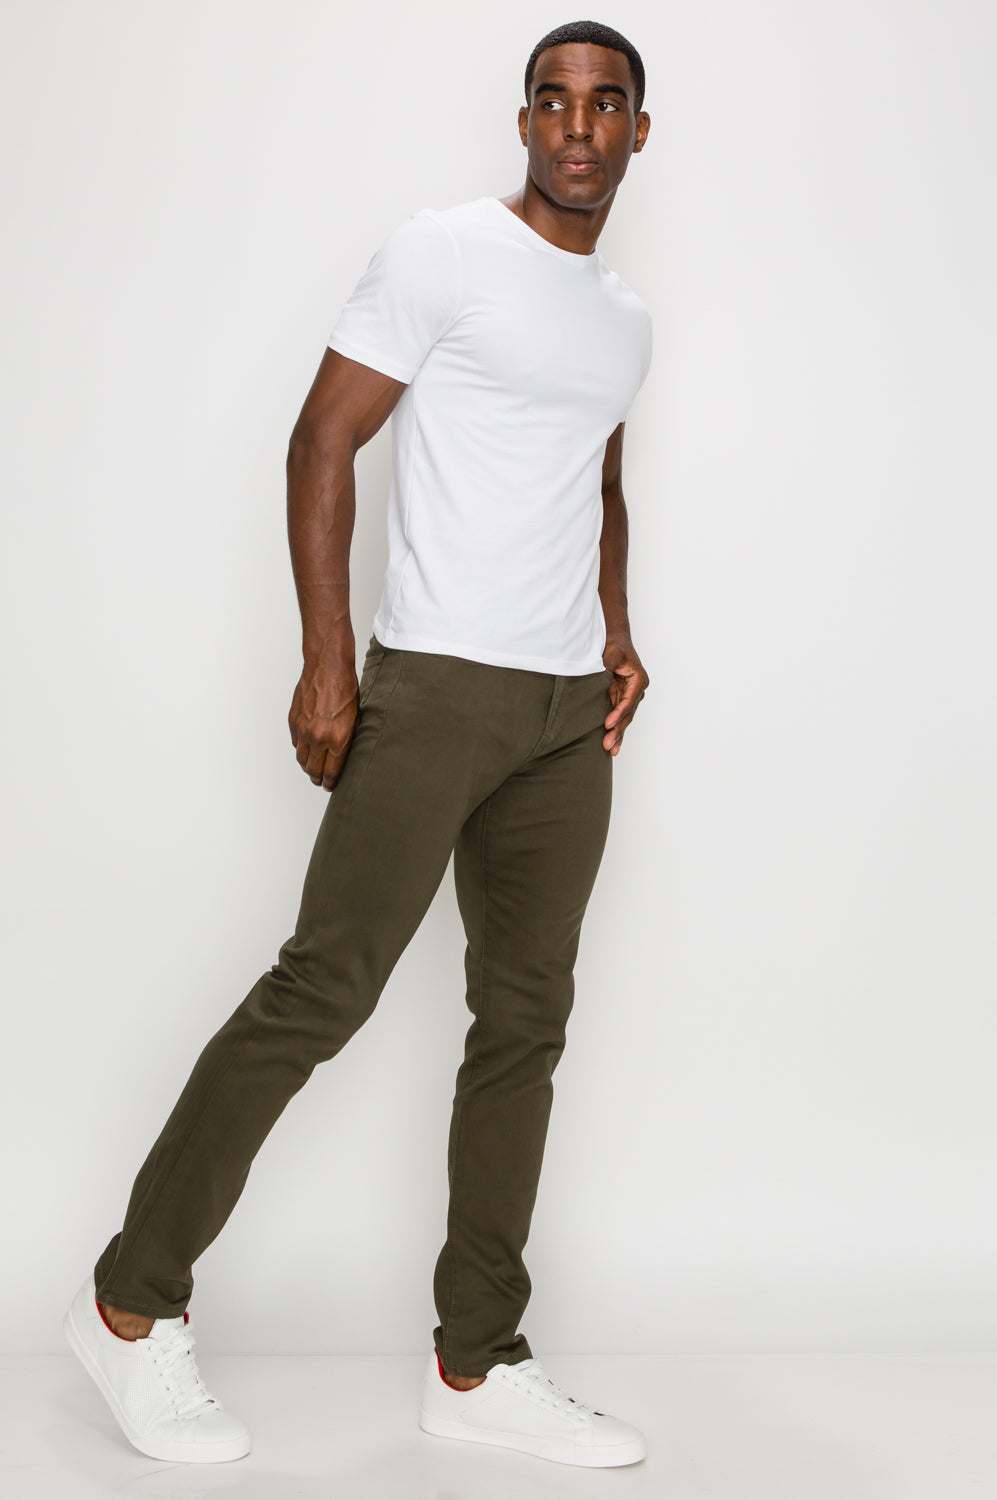 Buy Olive Green Trousers  Pants for Men by The Indian Garage Co Online   Ajiocom